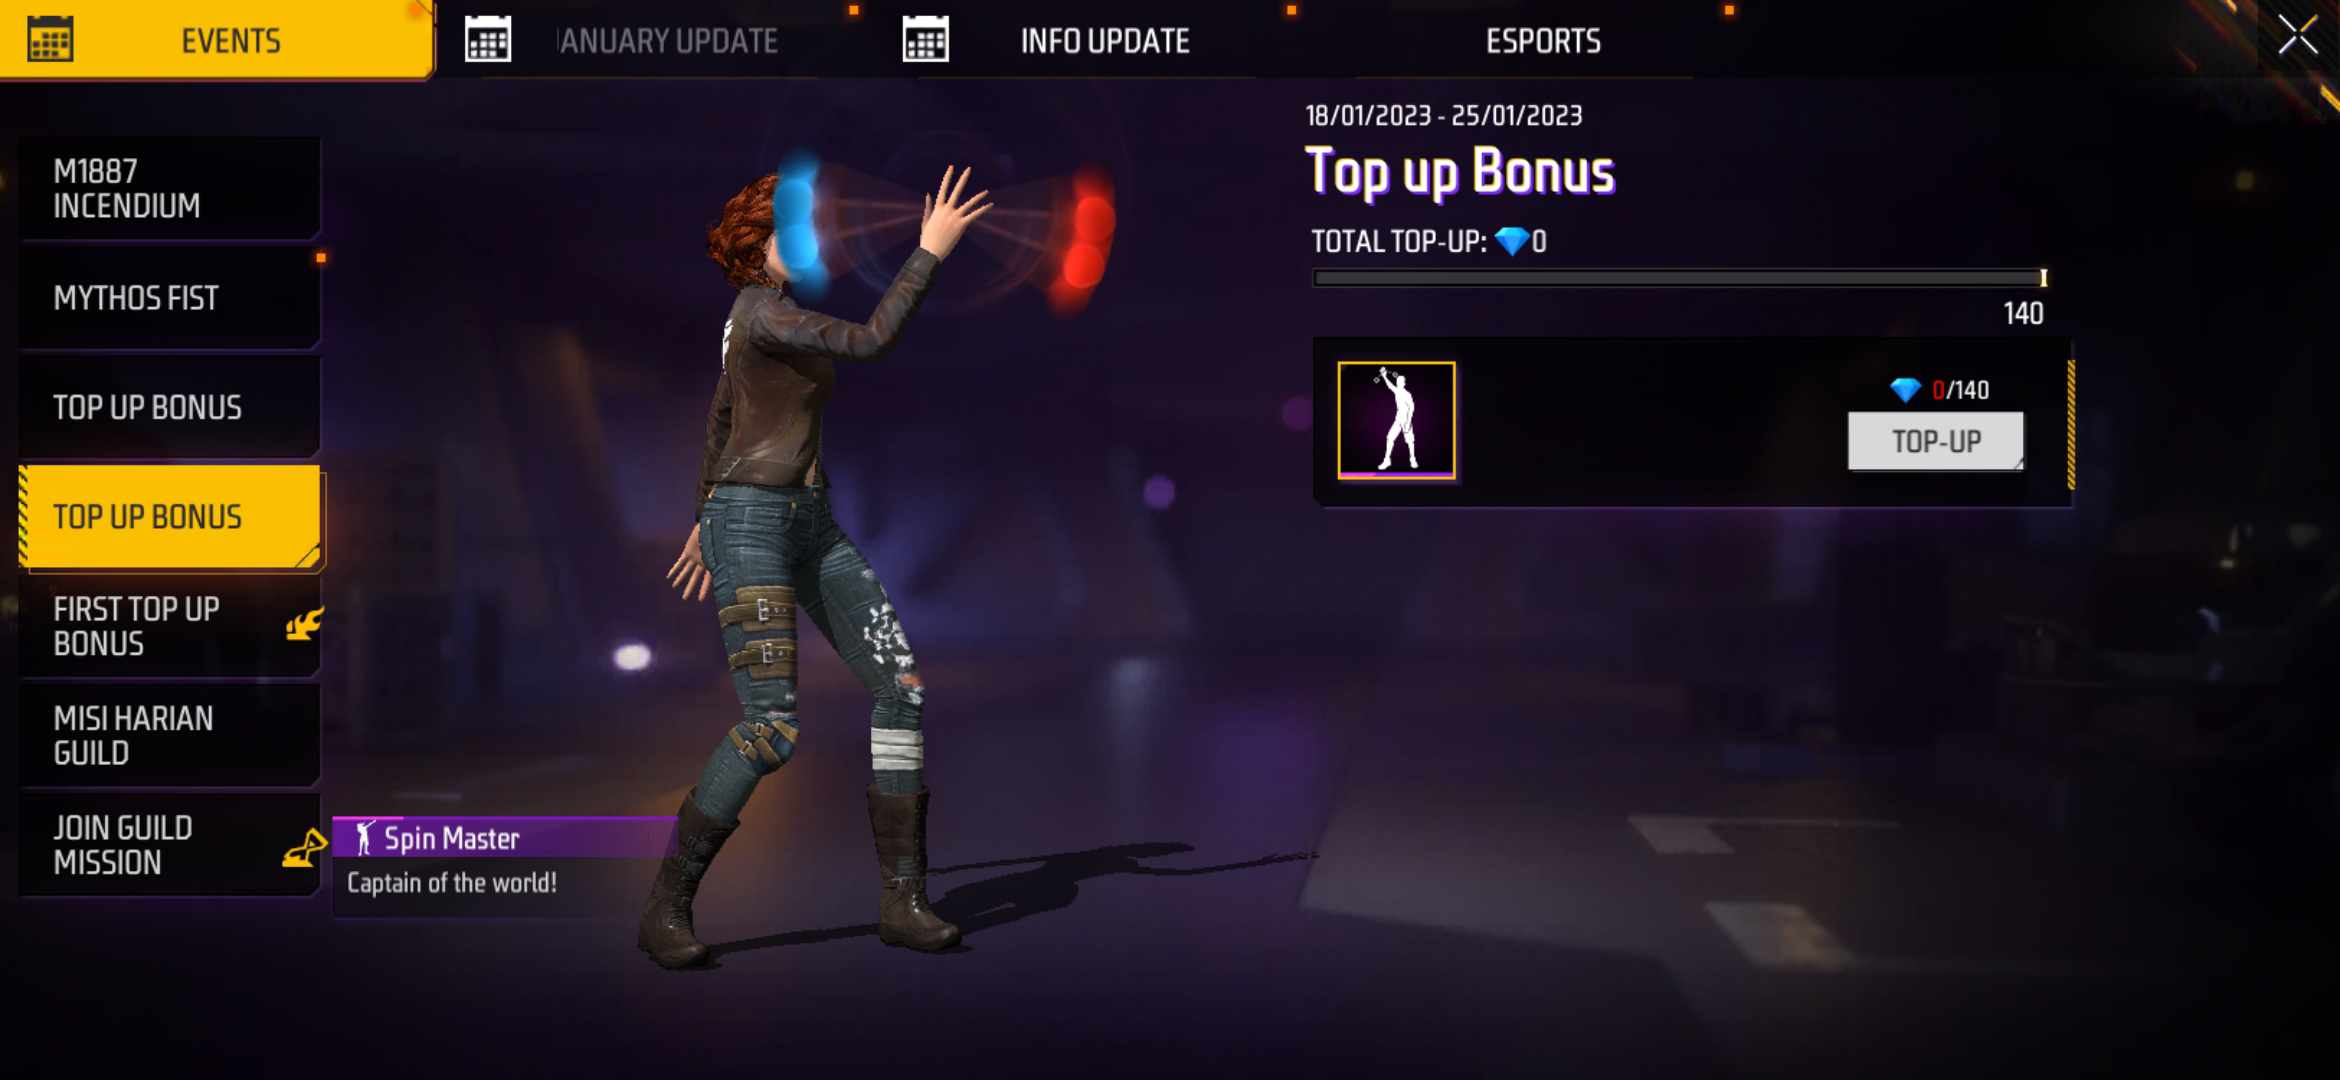 Upcoming Emote In Free Fire – Spin Master